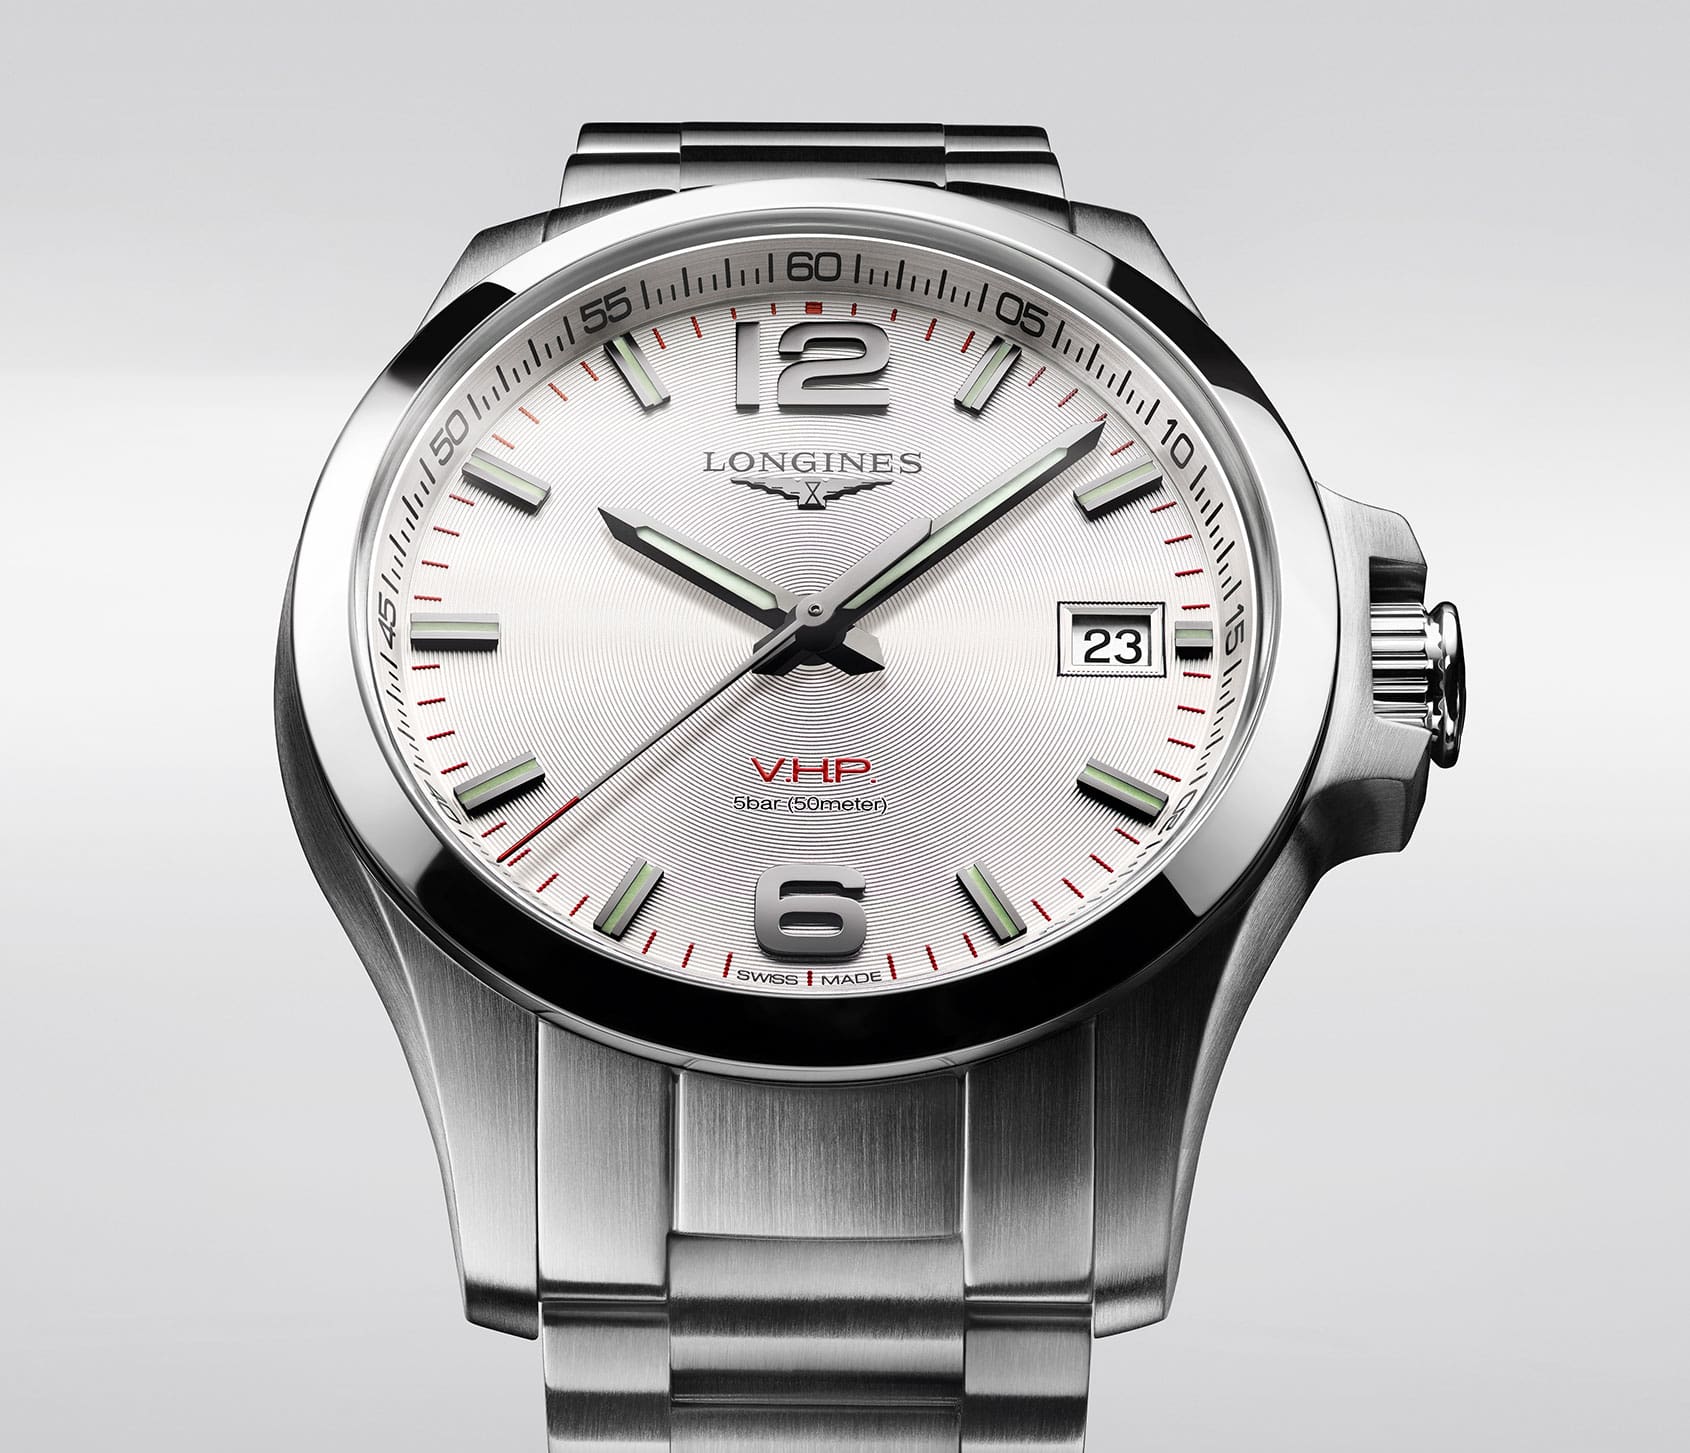 INTRODUCING: The Longines Conquest VHP – very precise, very cool